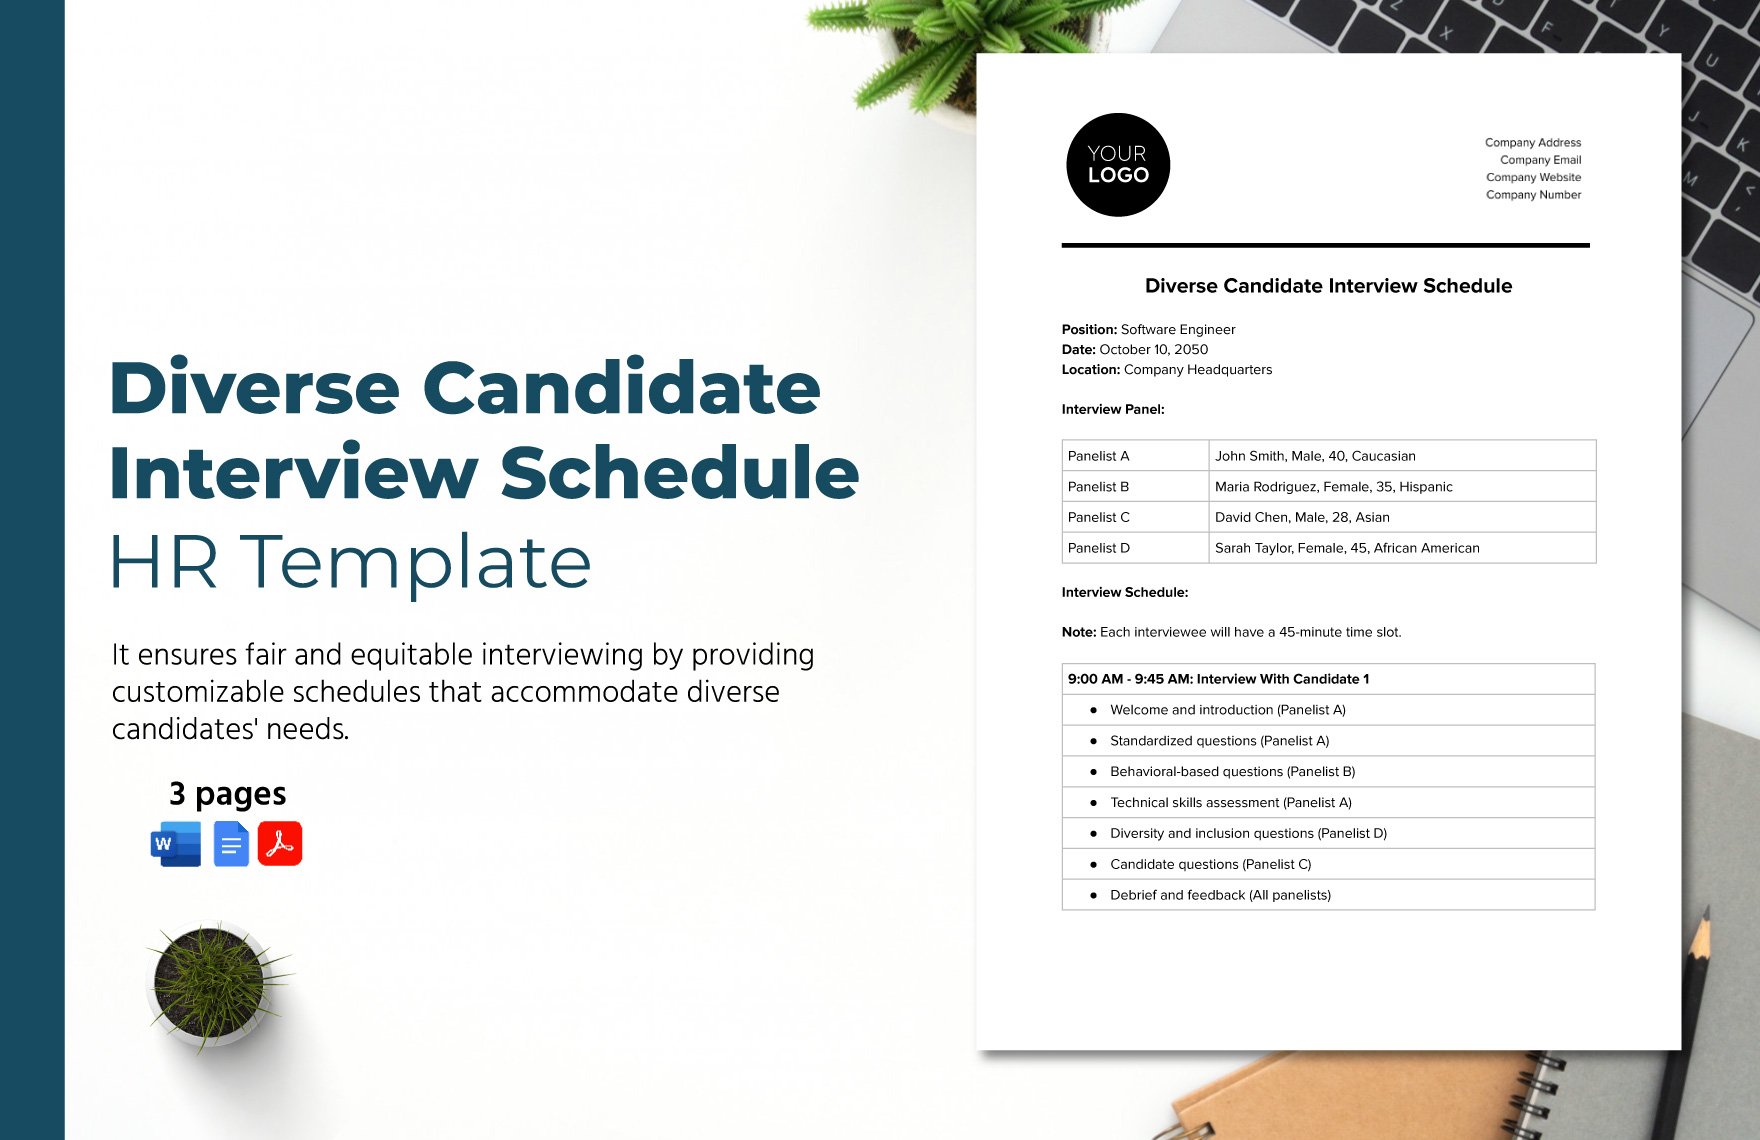 Diverse Candidate Interview Schedule HR Template in Word, Google Docs, PDF